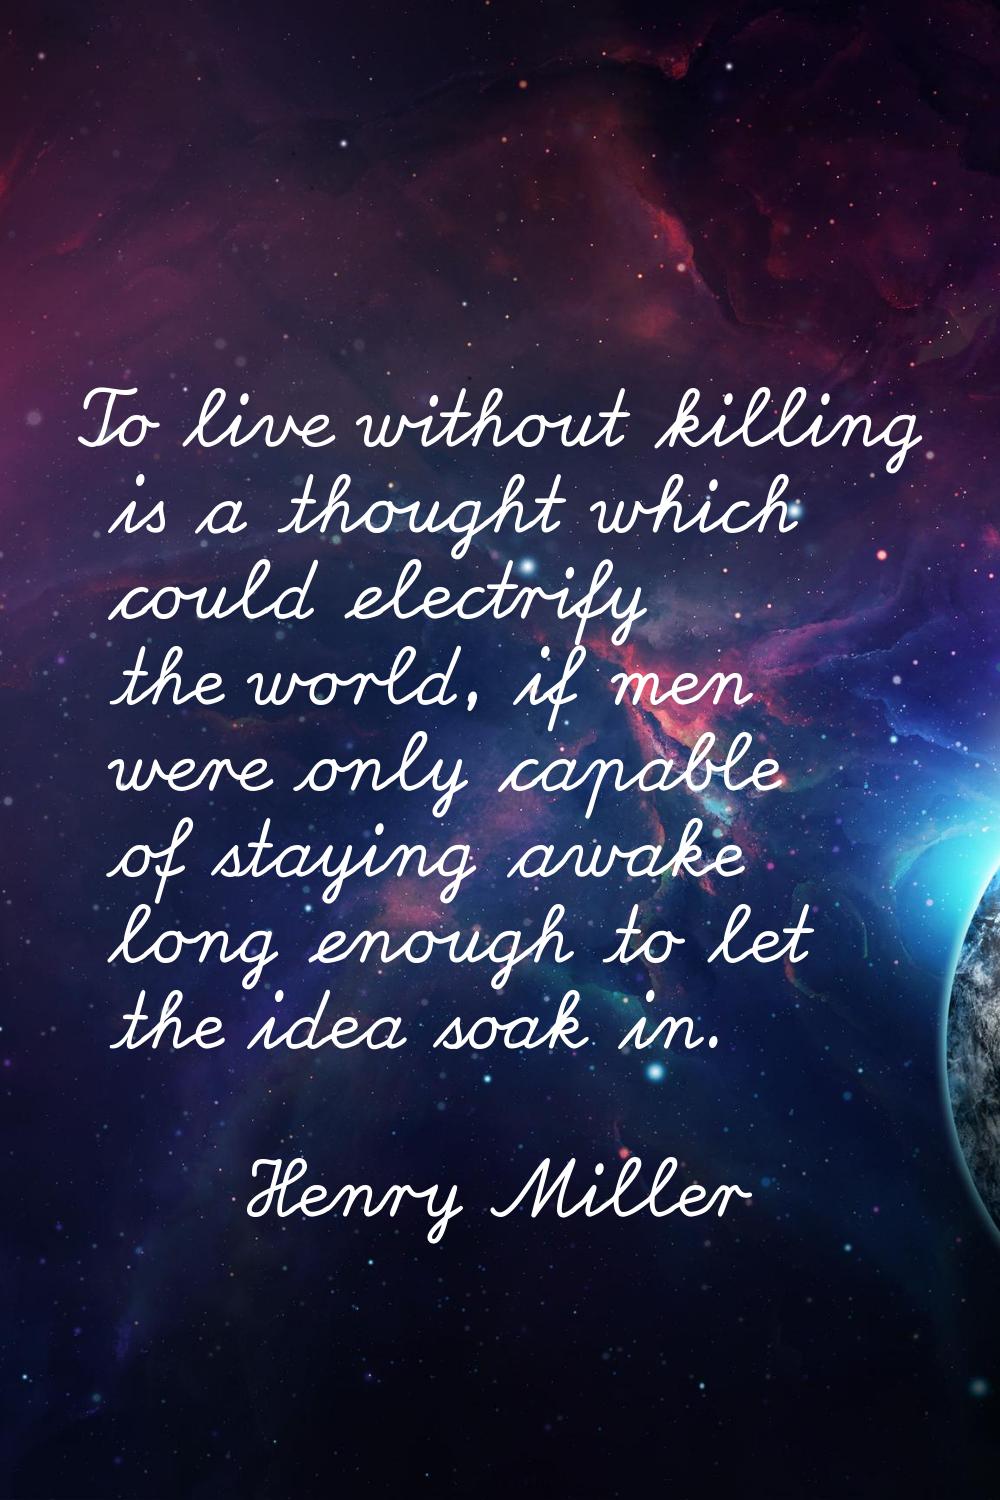 To live without killing is a thought which could electrify the world, if men were only capable of s